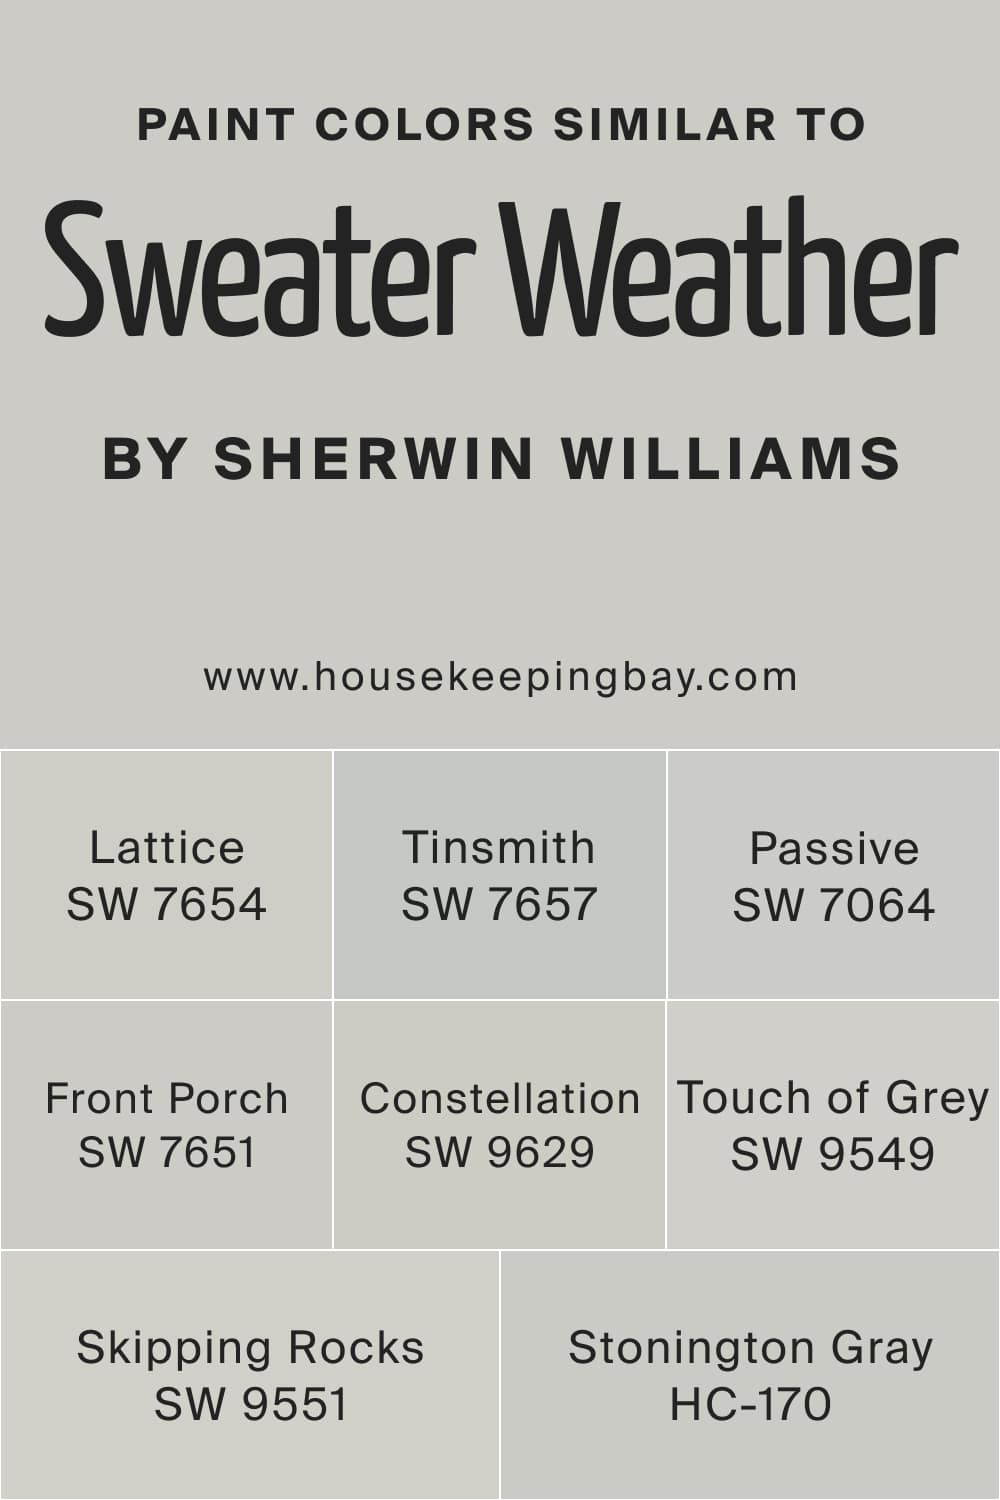 Paint Colors Similar to Sweater Weather SW 9548 by Sherwin Williams